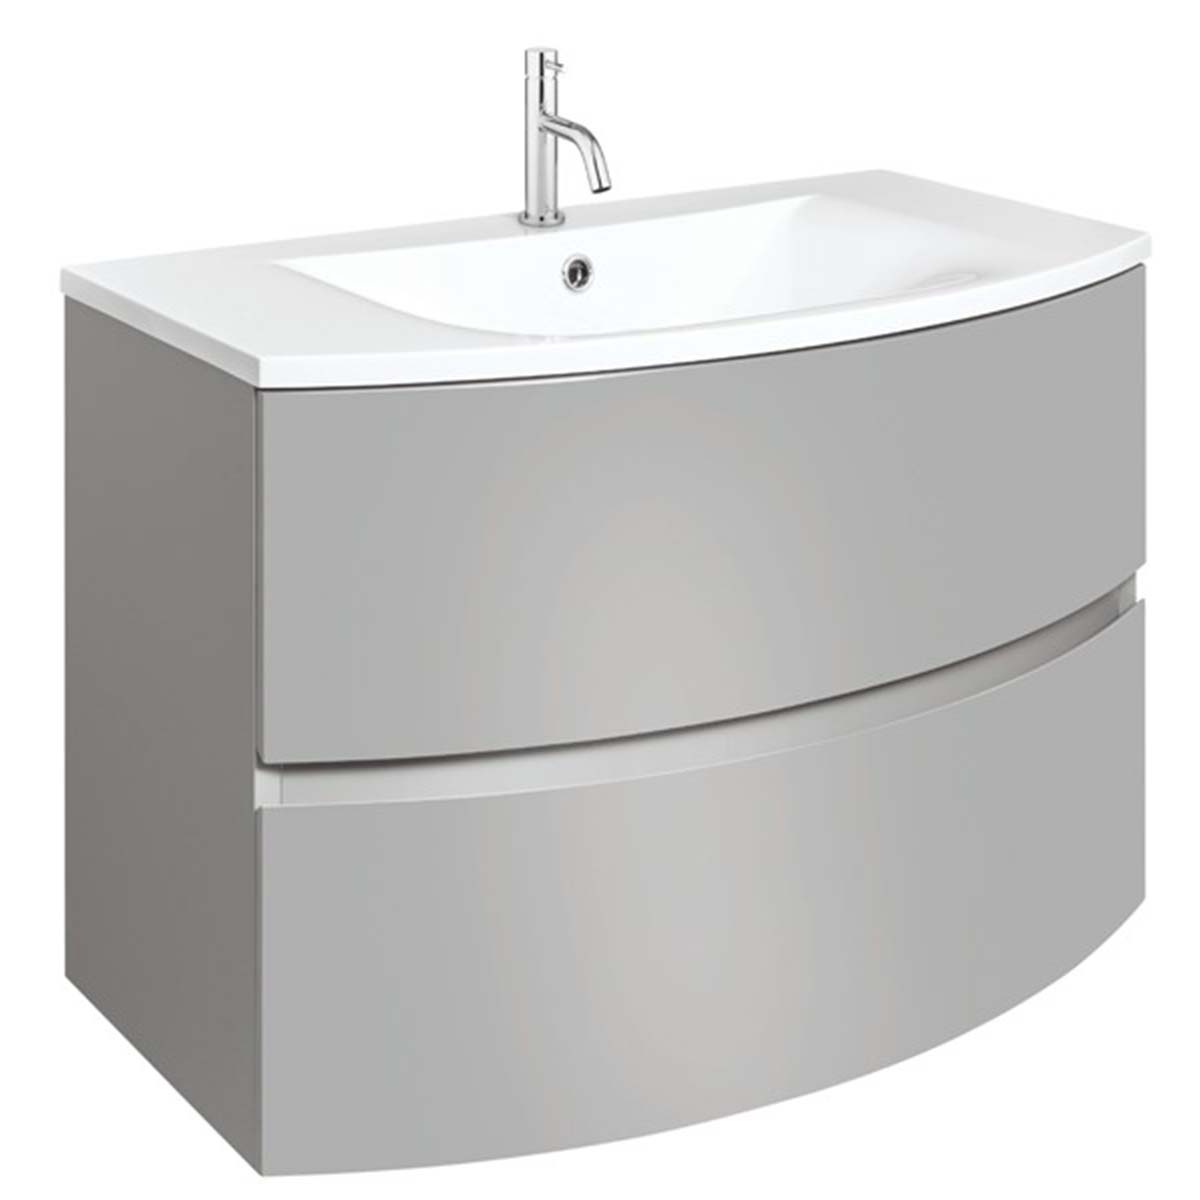 Crosswater Svelte 800mm Double Drawer Wall Hung Vanity Unit With Cast Mineral Marble Basin Storm Grey Matt